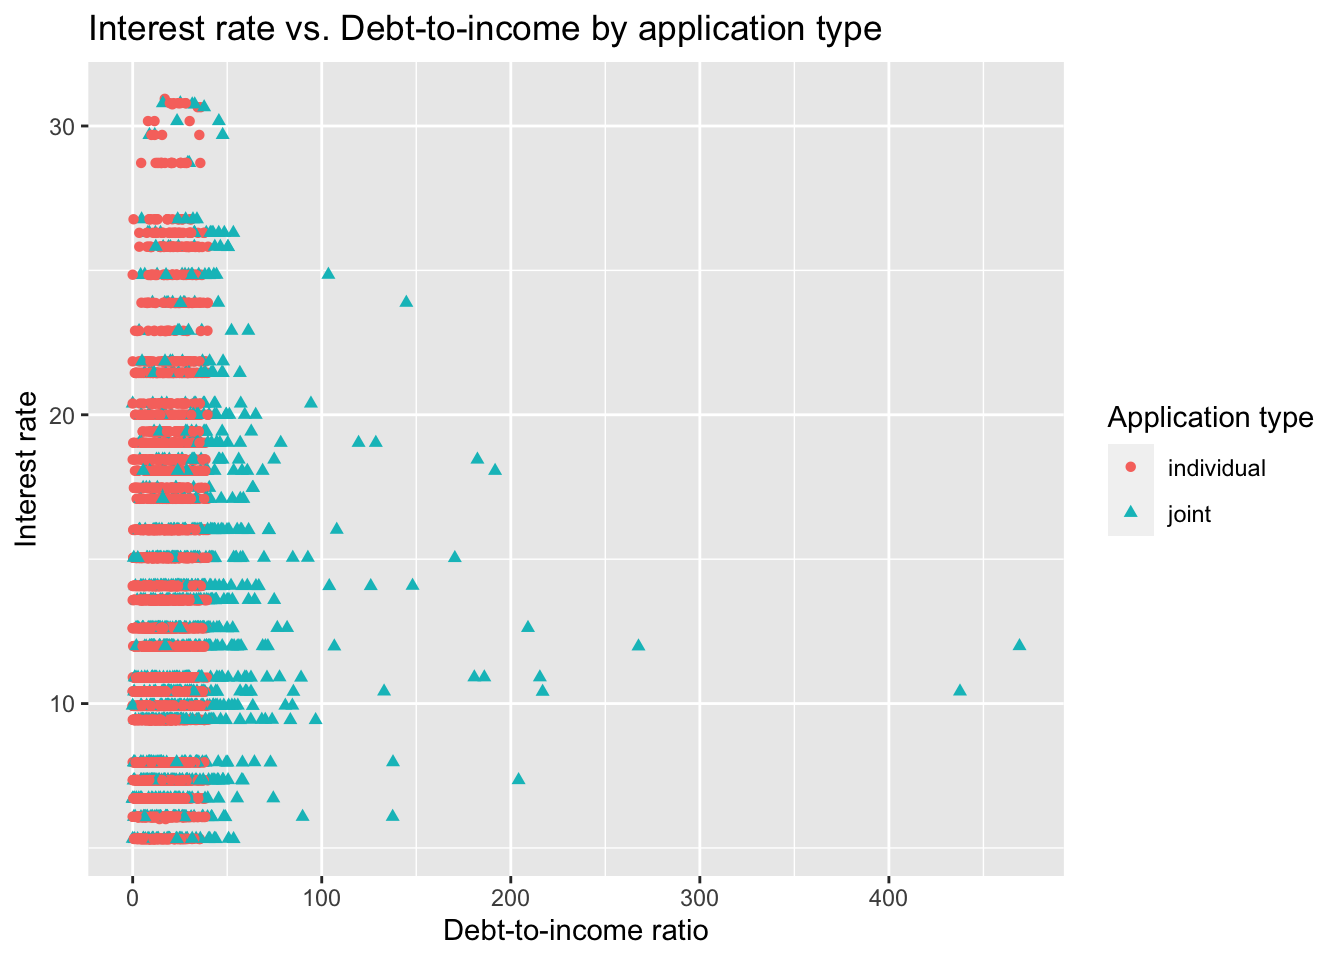 Scatterplot of interest rate vs. debt to income ratio, where different colors and shapes of point represent individual and joint applications. There is no clear relationship between interest rate and debt to income ratio. The only pattern that stands out is that debt to income ratio tends to be lower for individual applications (below 50) while it ranges all the way up to above 400 for joint applications.